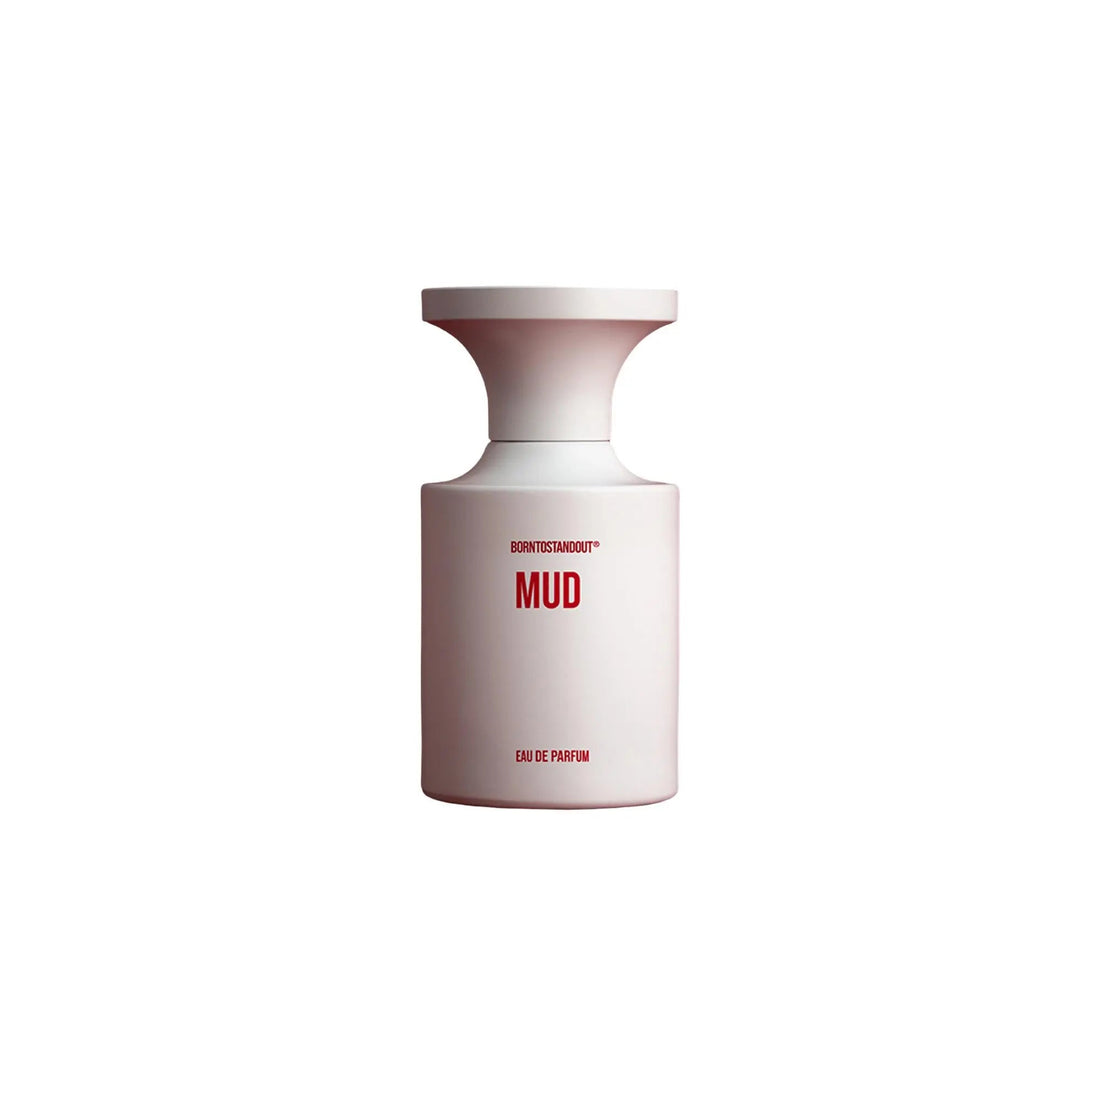 Born to stand out Barro - 50ml